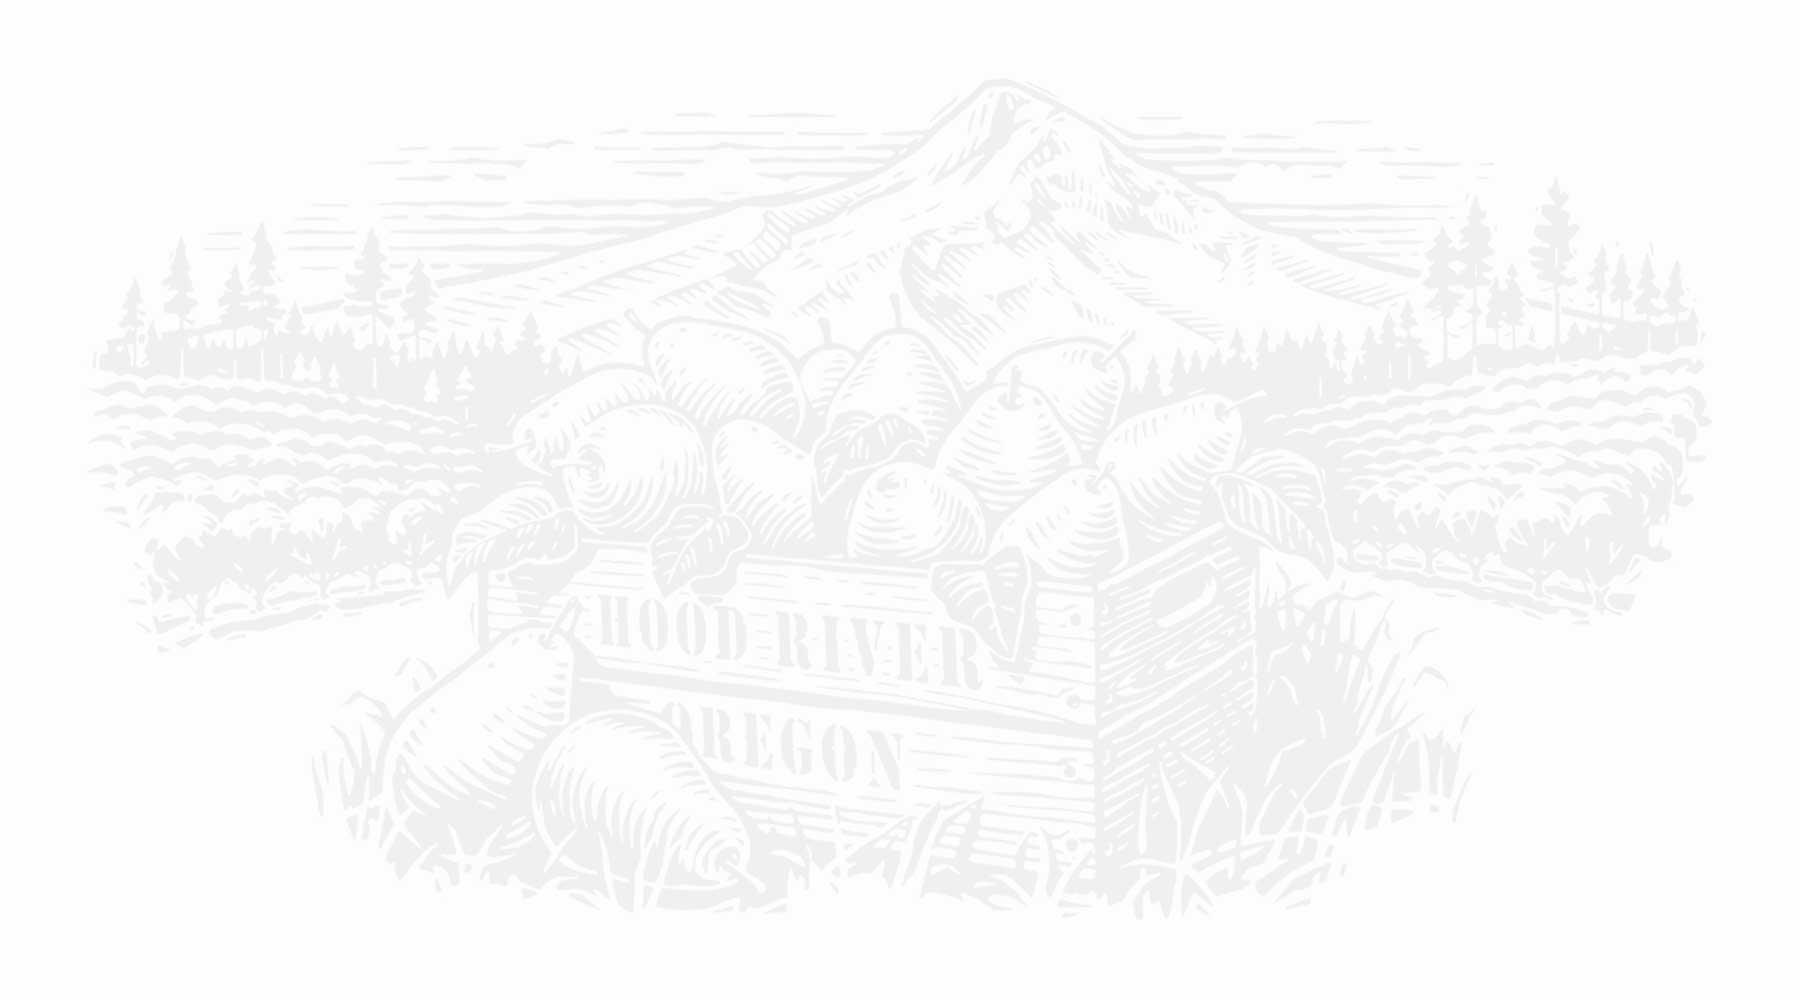 Watermark graphic of an artistic drawing showing a wooden crate full of pears with Mount Hood in the background.